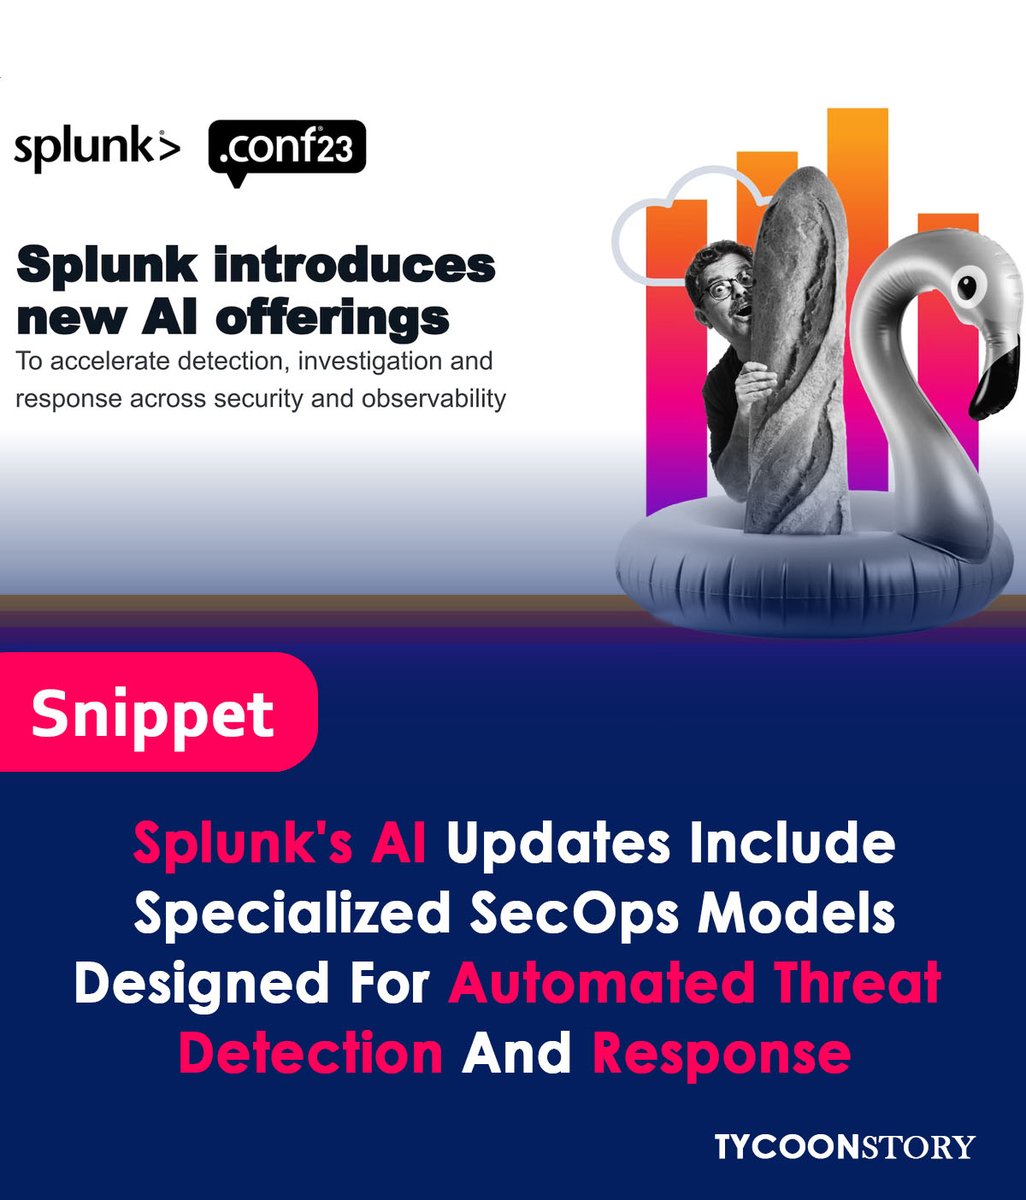 Splunk AI updates included specialized models for SecOps that detect and automatically respond to common issues

#SplunkAI #aiassistant #secops #devops #ITServiceIntelligence #Security #ThreatAnalysis #UserInterfaces #ThreatIntelligence #OpenAI #DevSecOps #Observability @splunk